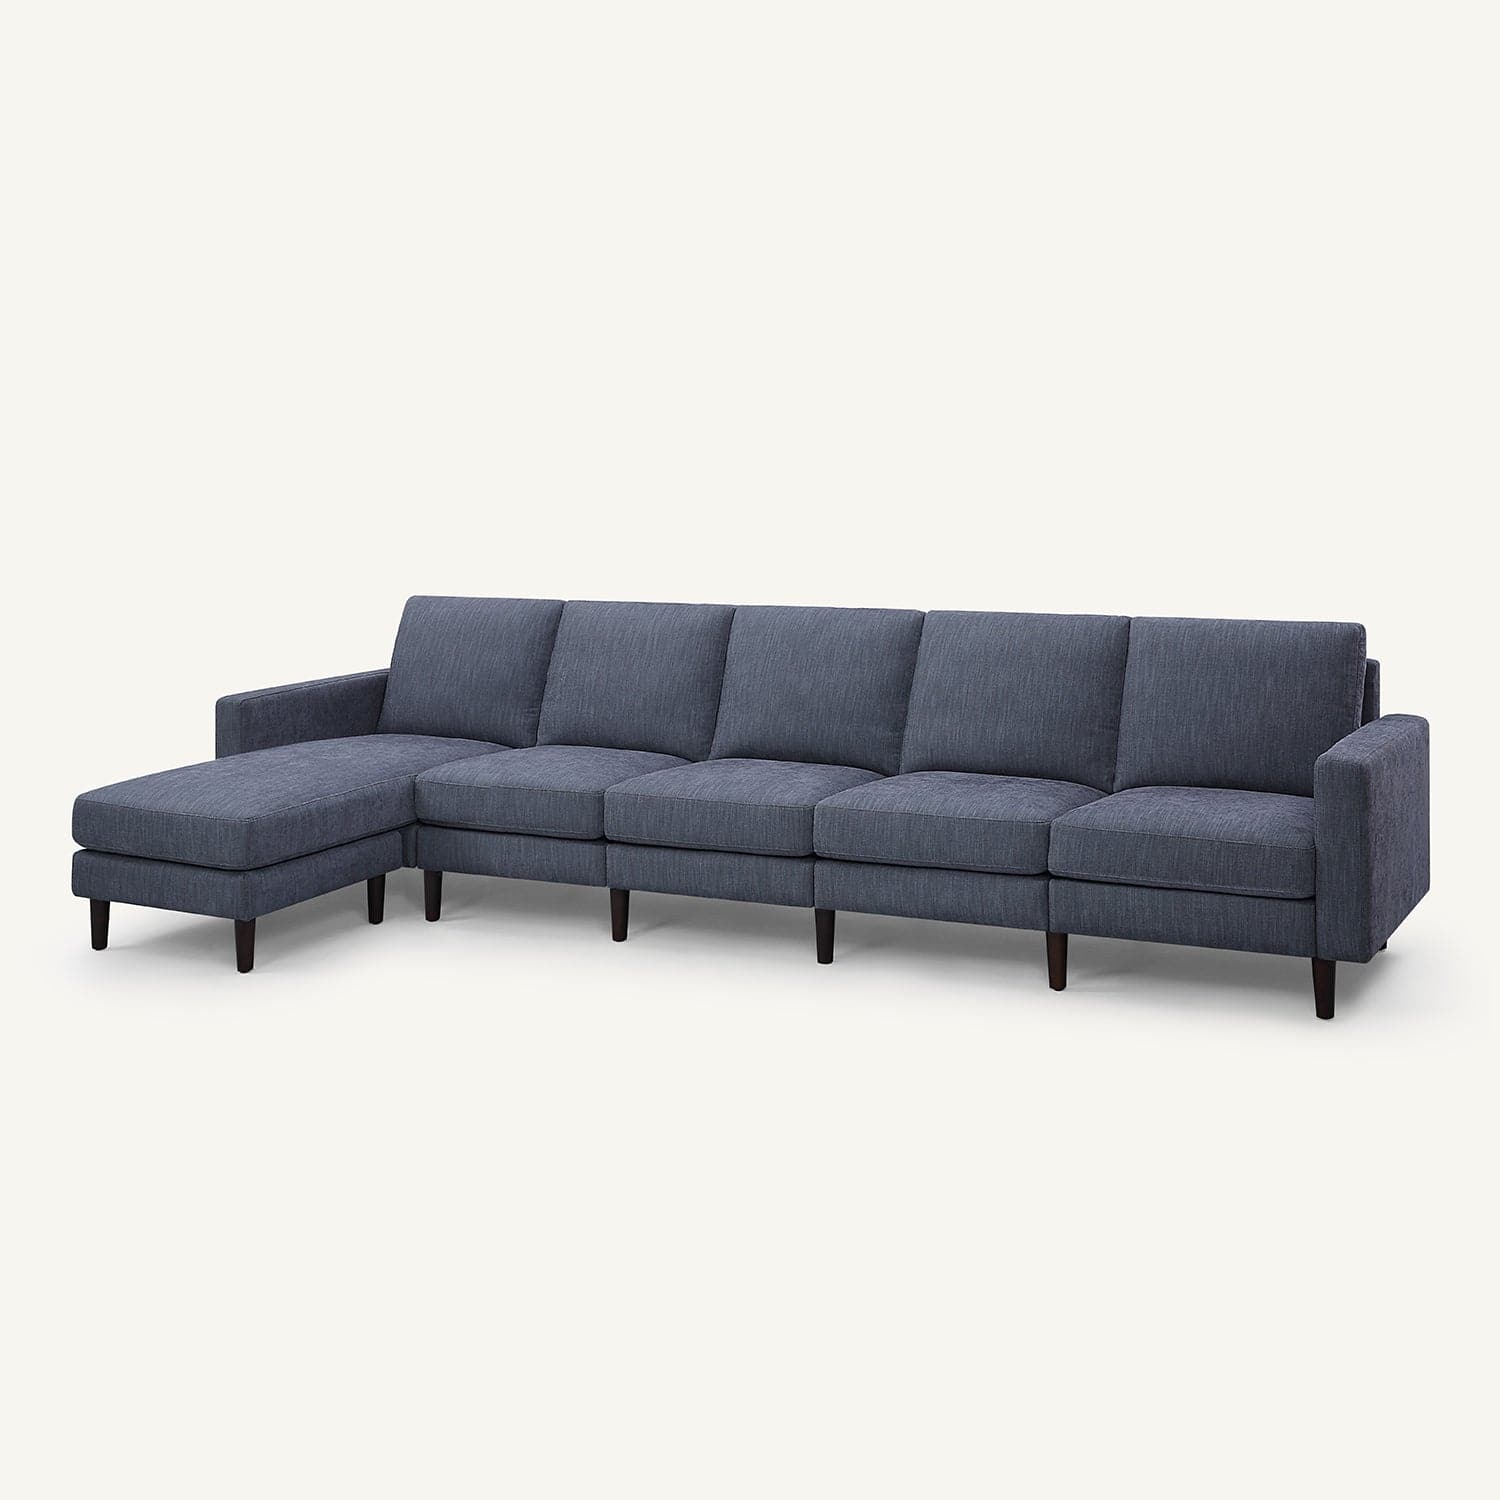 Transformer Linen 5-Seat Sofa with Chaise